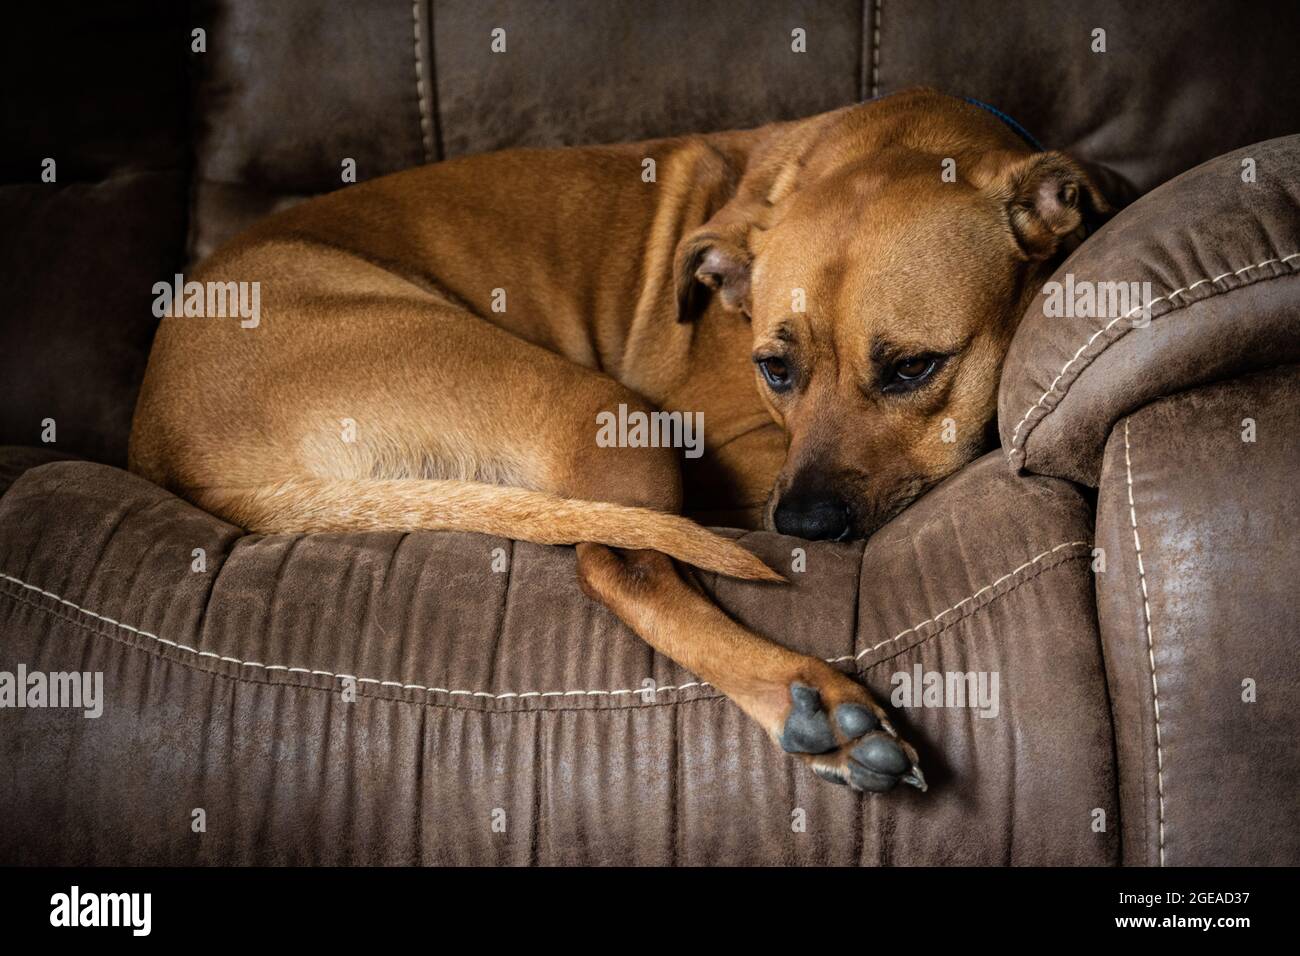 A beautiful red dog curled up on comfy rustic farmhouse sofa. Stock Photo